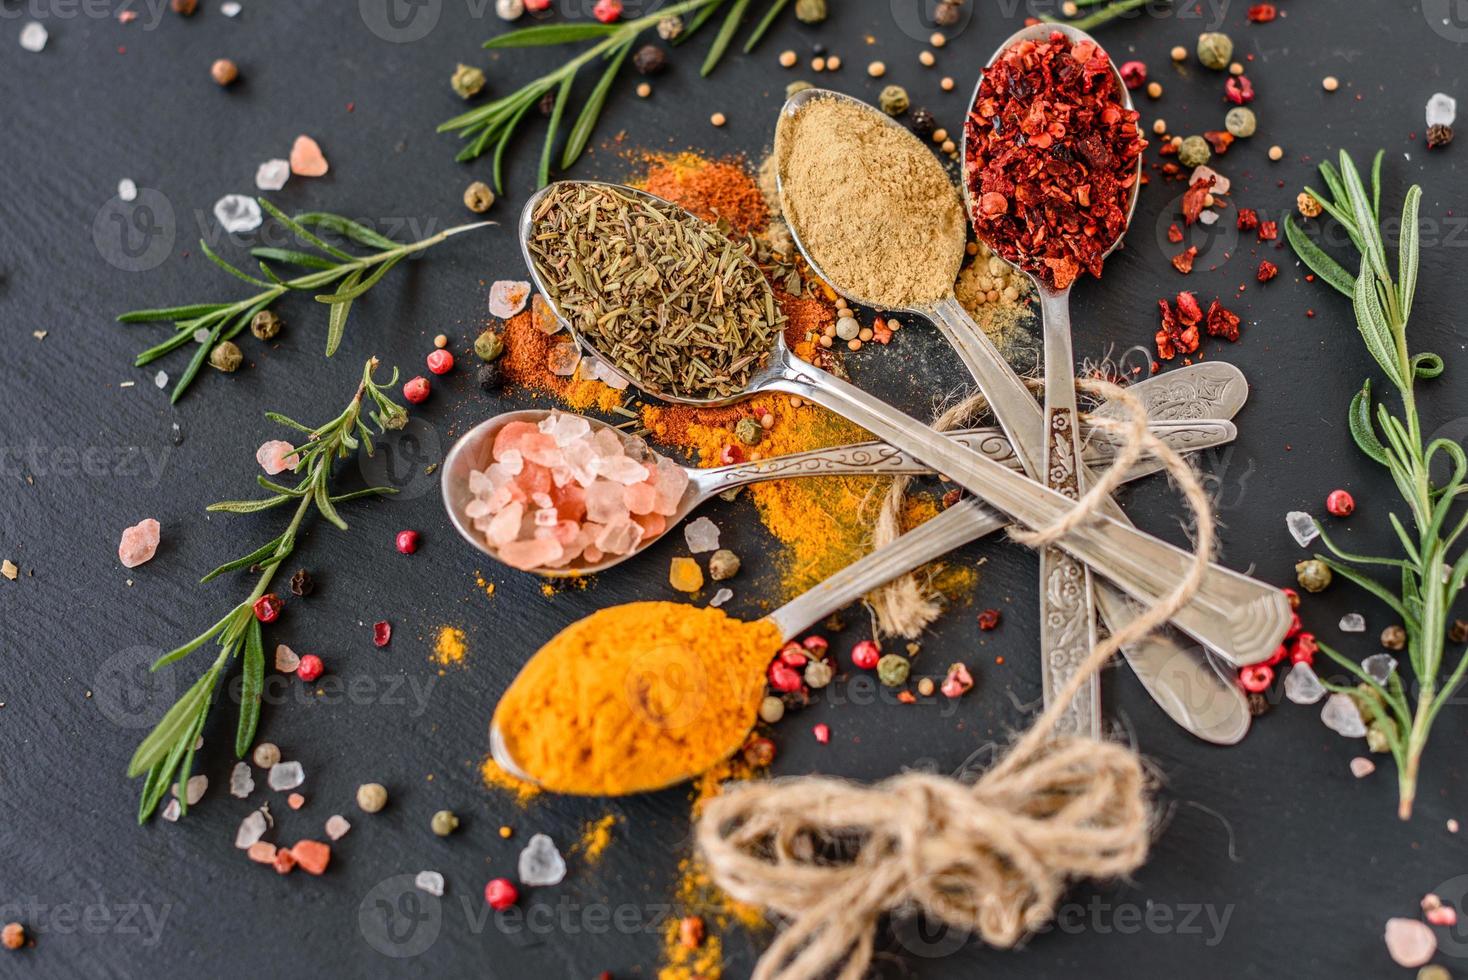 Spices and herbs on old kitchen table. Food and cuisine ingredients photo